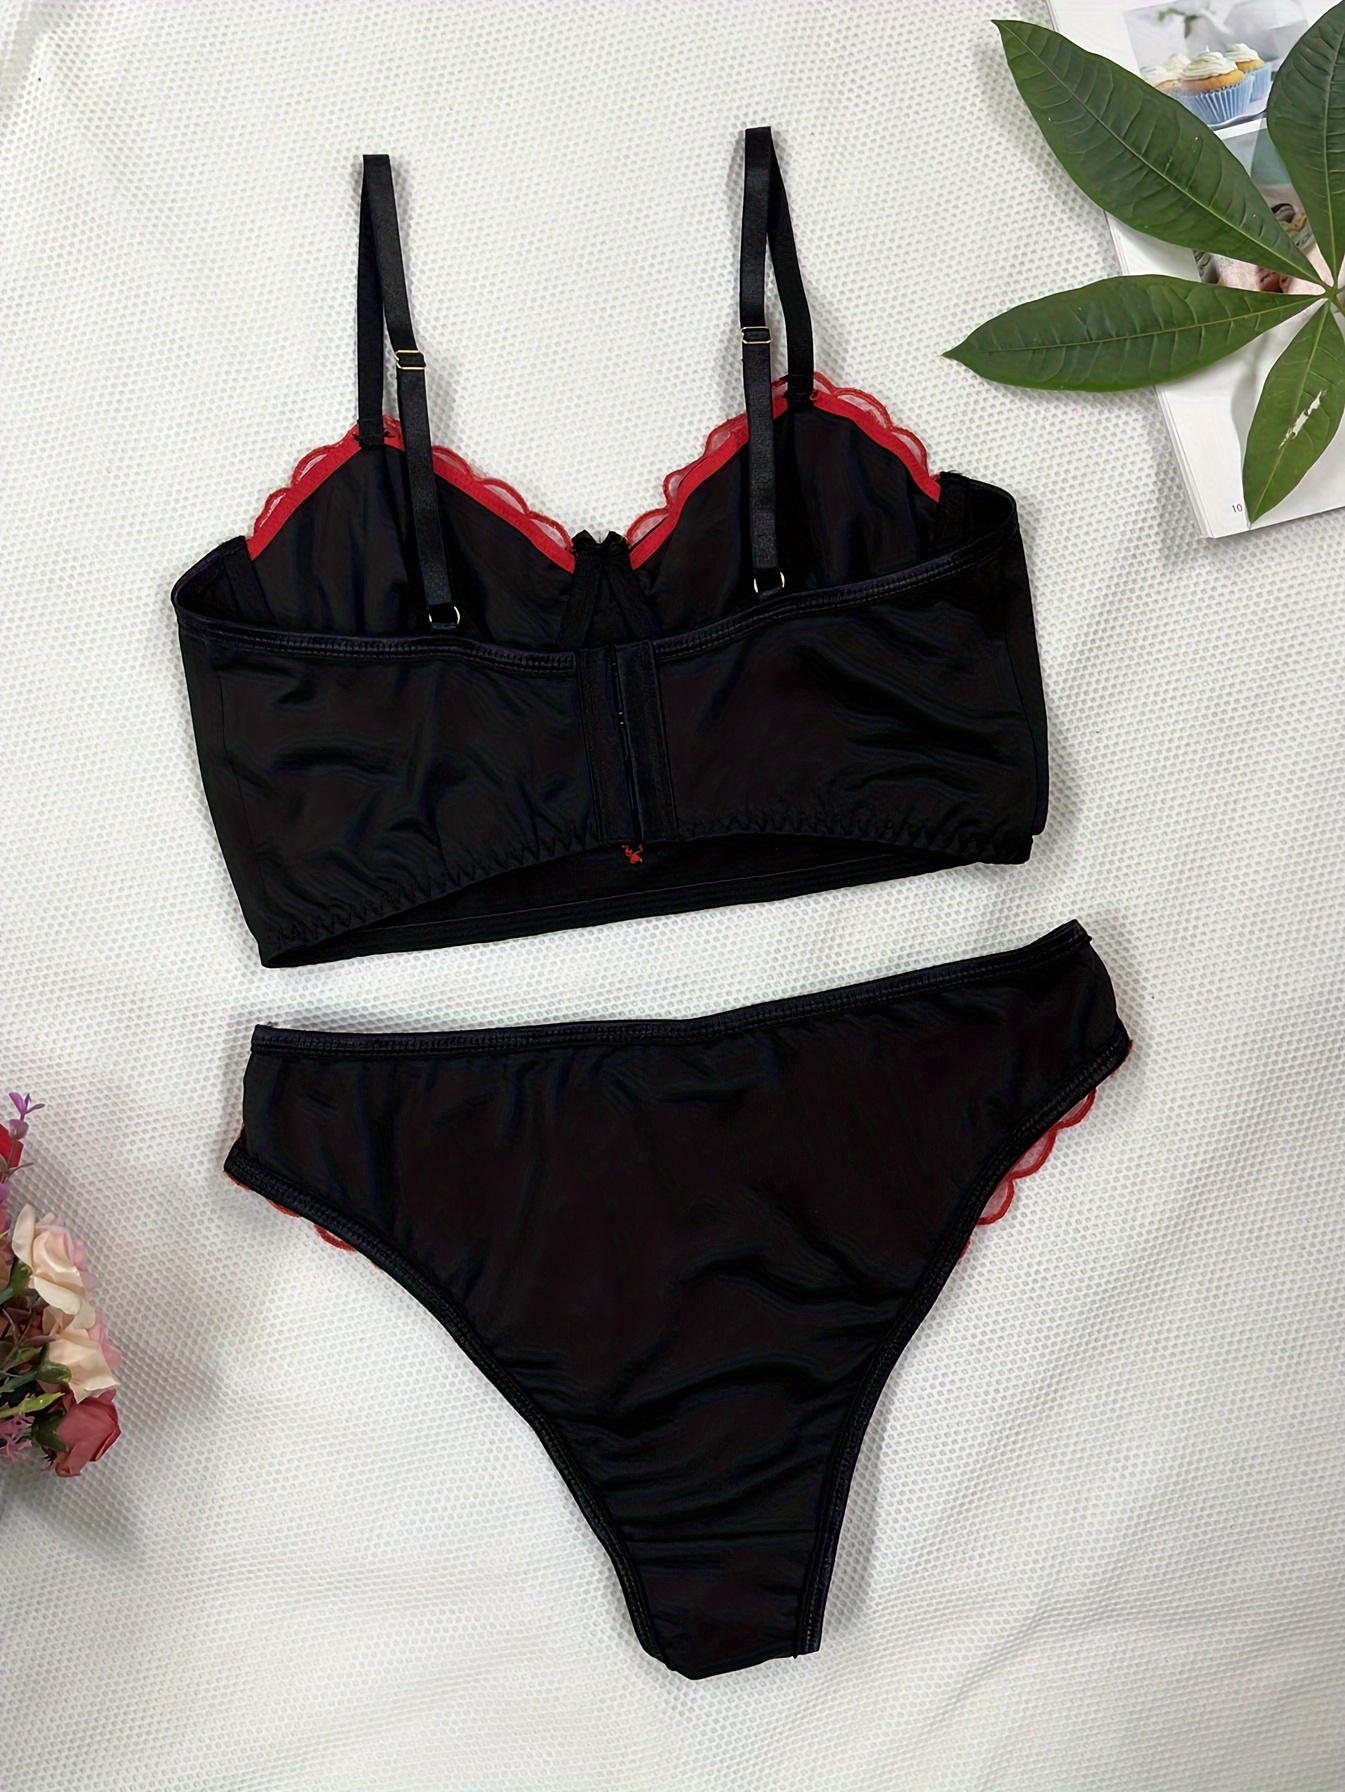 Intimo Lingerie - Unique embroidery and bold block of